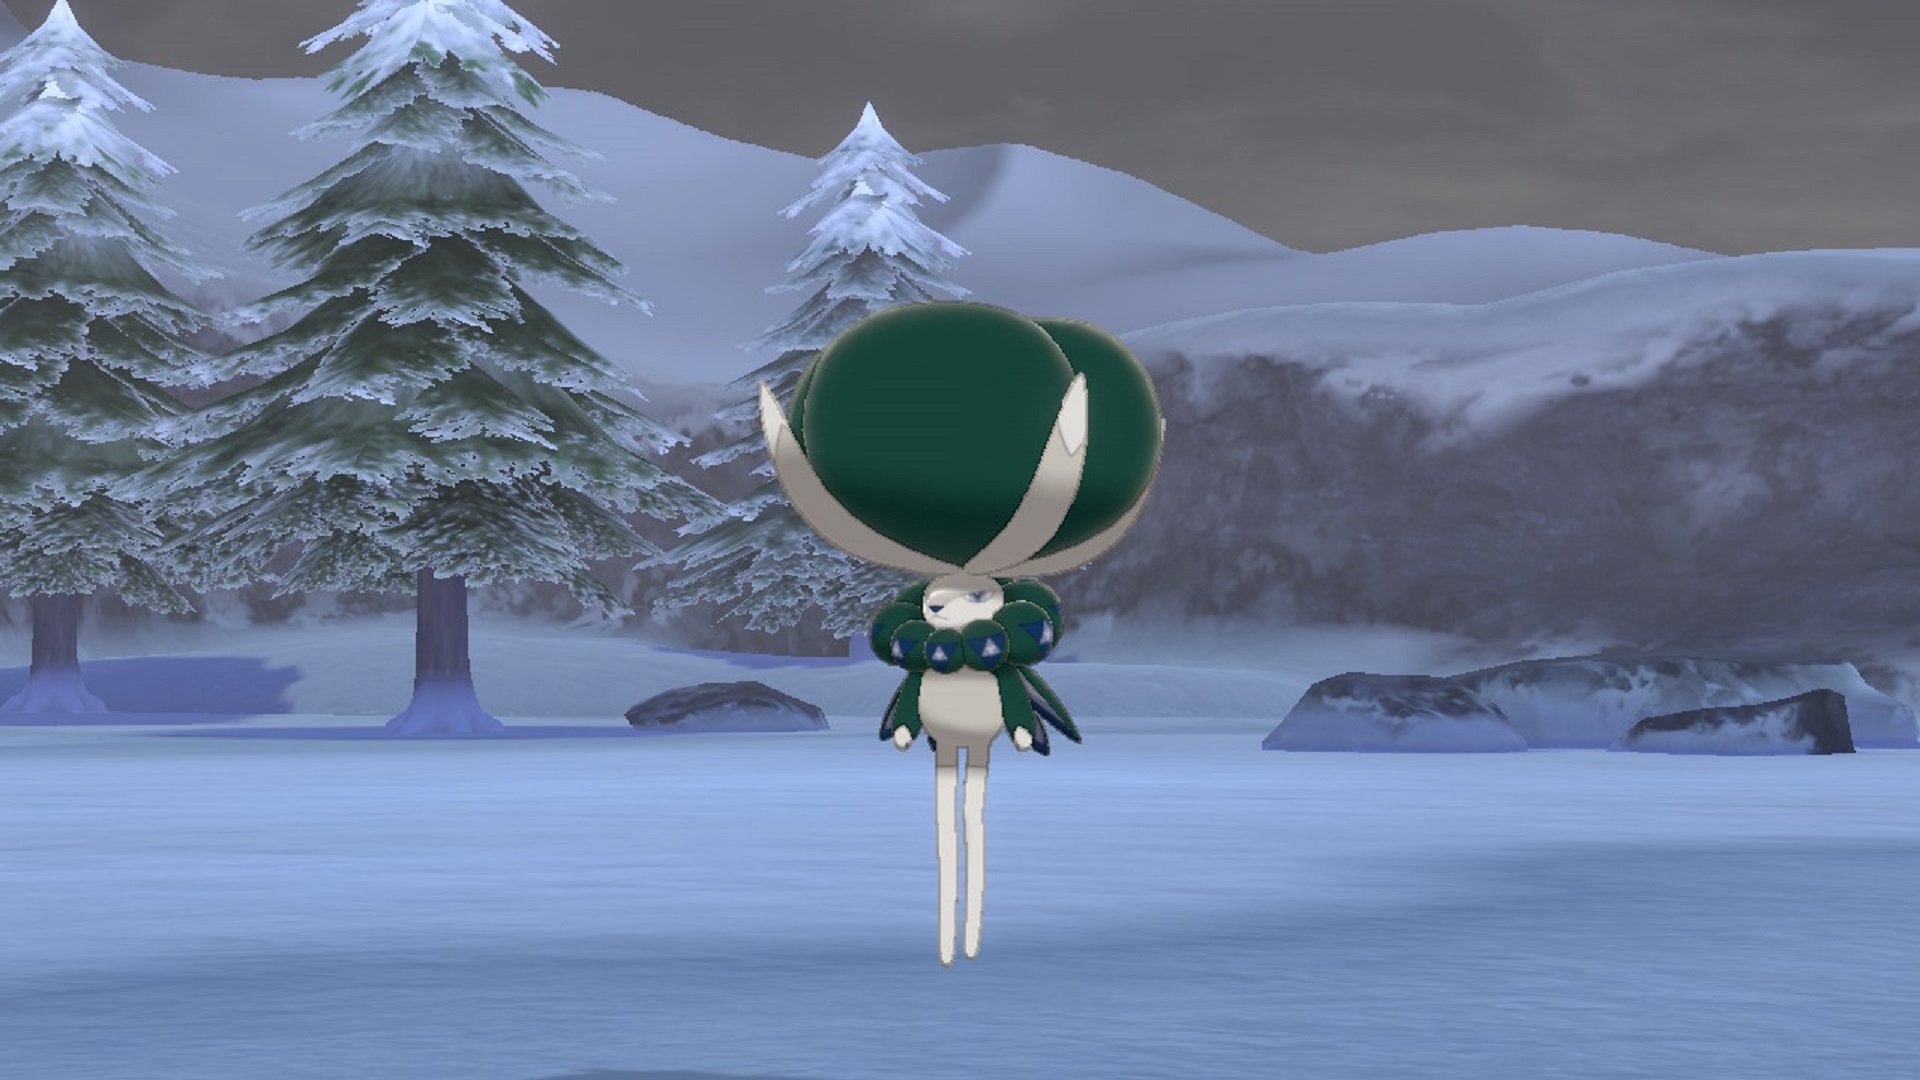 Pokemon Sword and Shield Unveils New Mythical Monster, Zarude